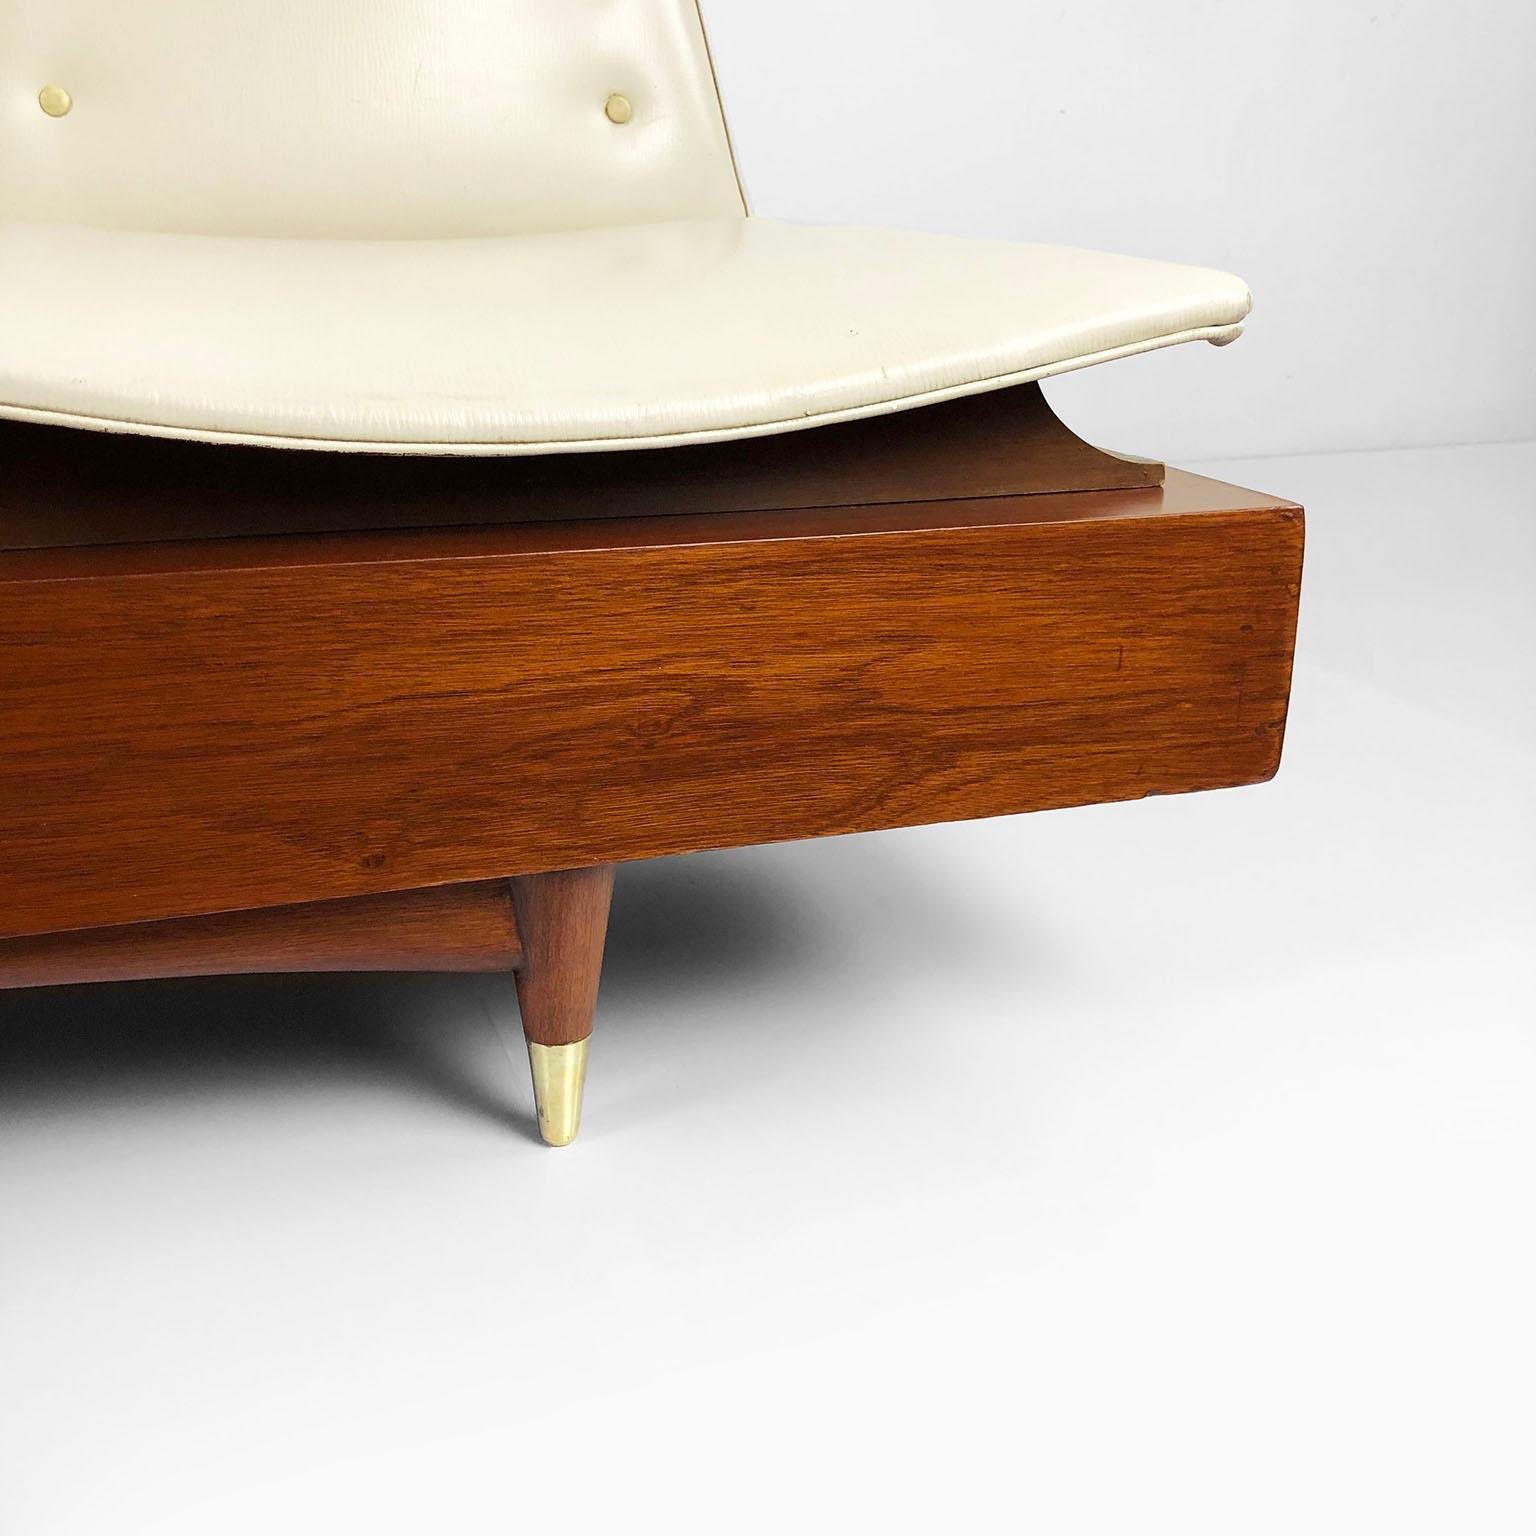 We offer this rare midcentury Mexican telephone bench designed by Eugenio Escudero in mahogany wood with brass accents, circa 1950.